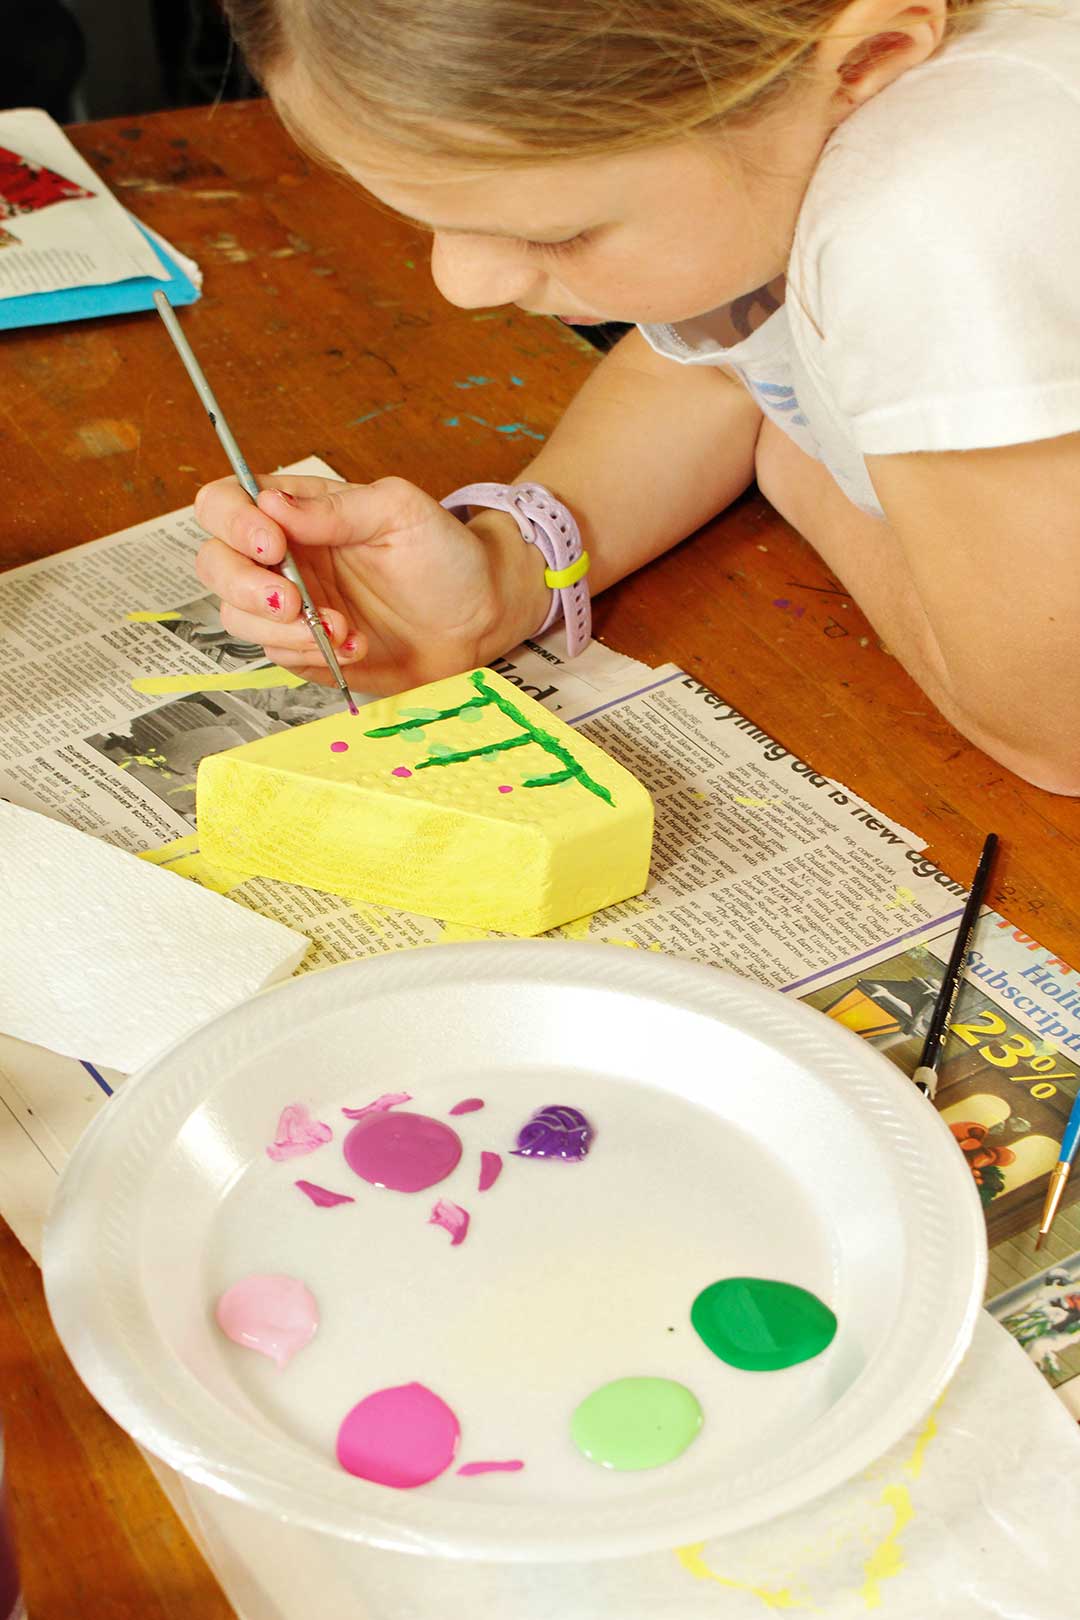 Young girl paints flowers onto her wooden block painted yellow with a plate of paint colors and various supplies around.